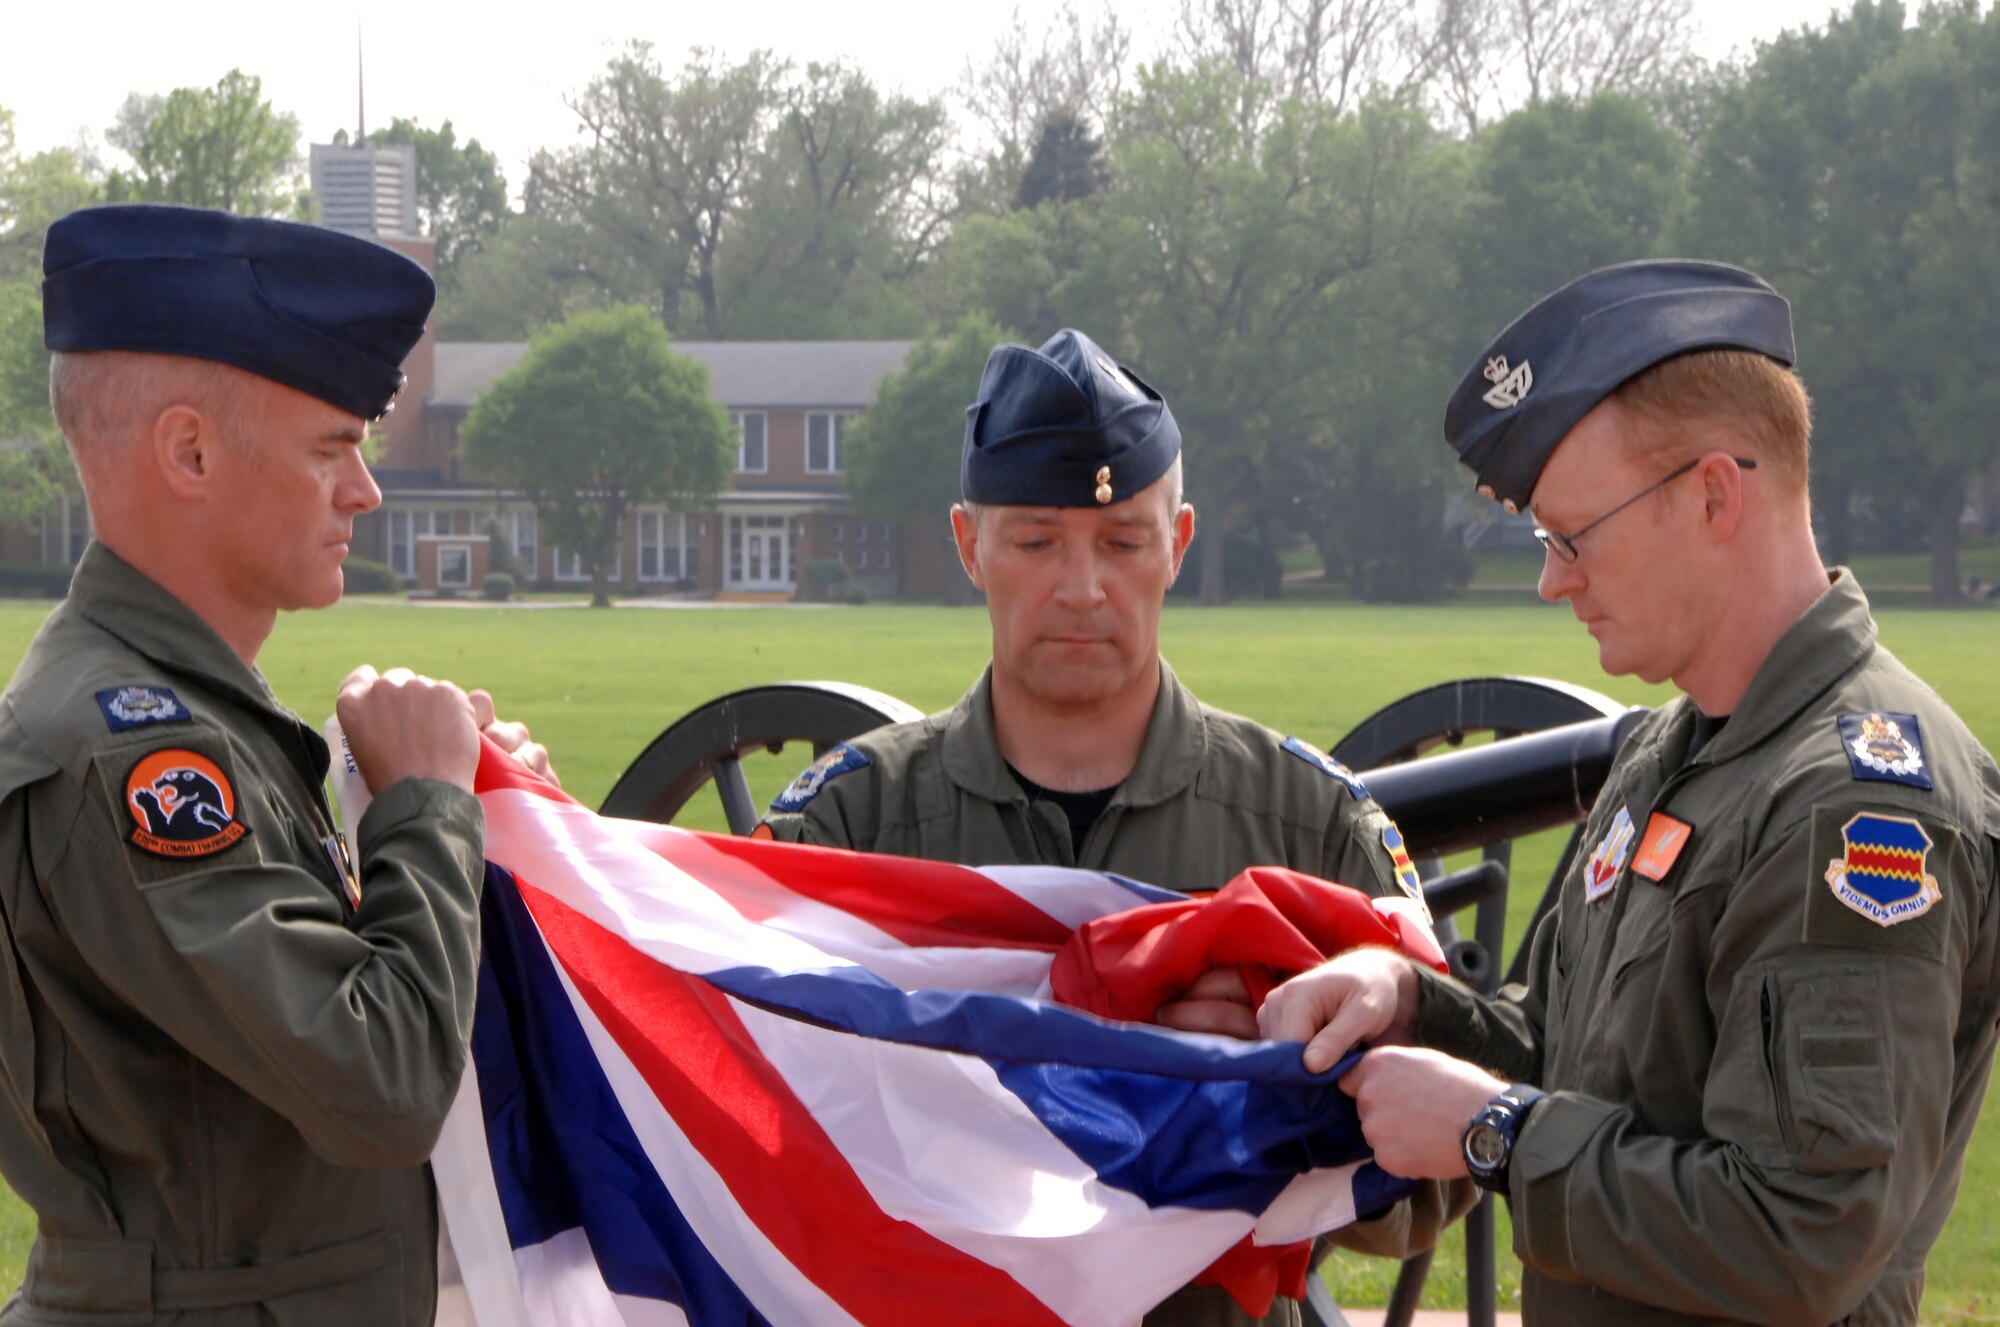 OFFUTT AIR FORCE BASE, Neb. -- The flag of the United Kingdom is folded by Royal Air Force members Master Aircrew Glyn Vigurs, Master Aircrew Stephen Jones and Master Aircrew Kevin Ross during a special retreat ceremony here May 18. The RAF members are attending RC-135V/W initial qualification training here and joined with other members of the 338th Combat Training Squadron in the special ceremony at the parade grounds. (Air Force photo by Dana Heard)